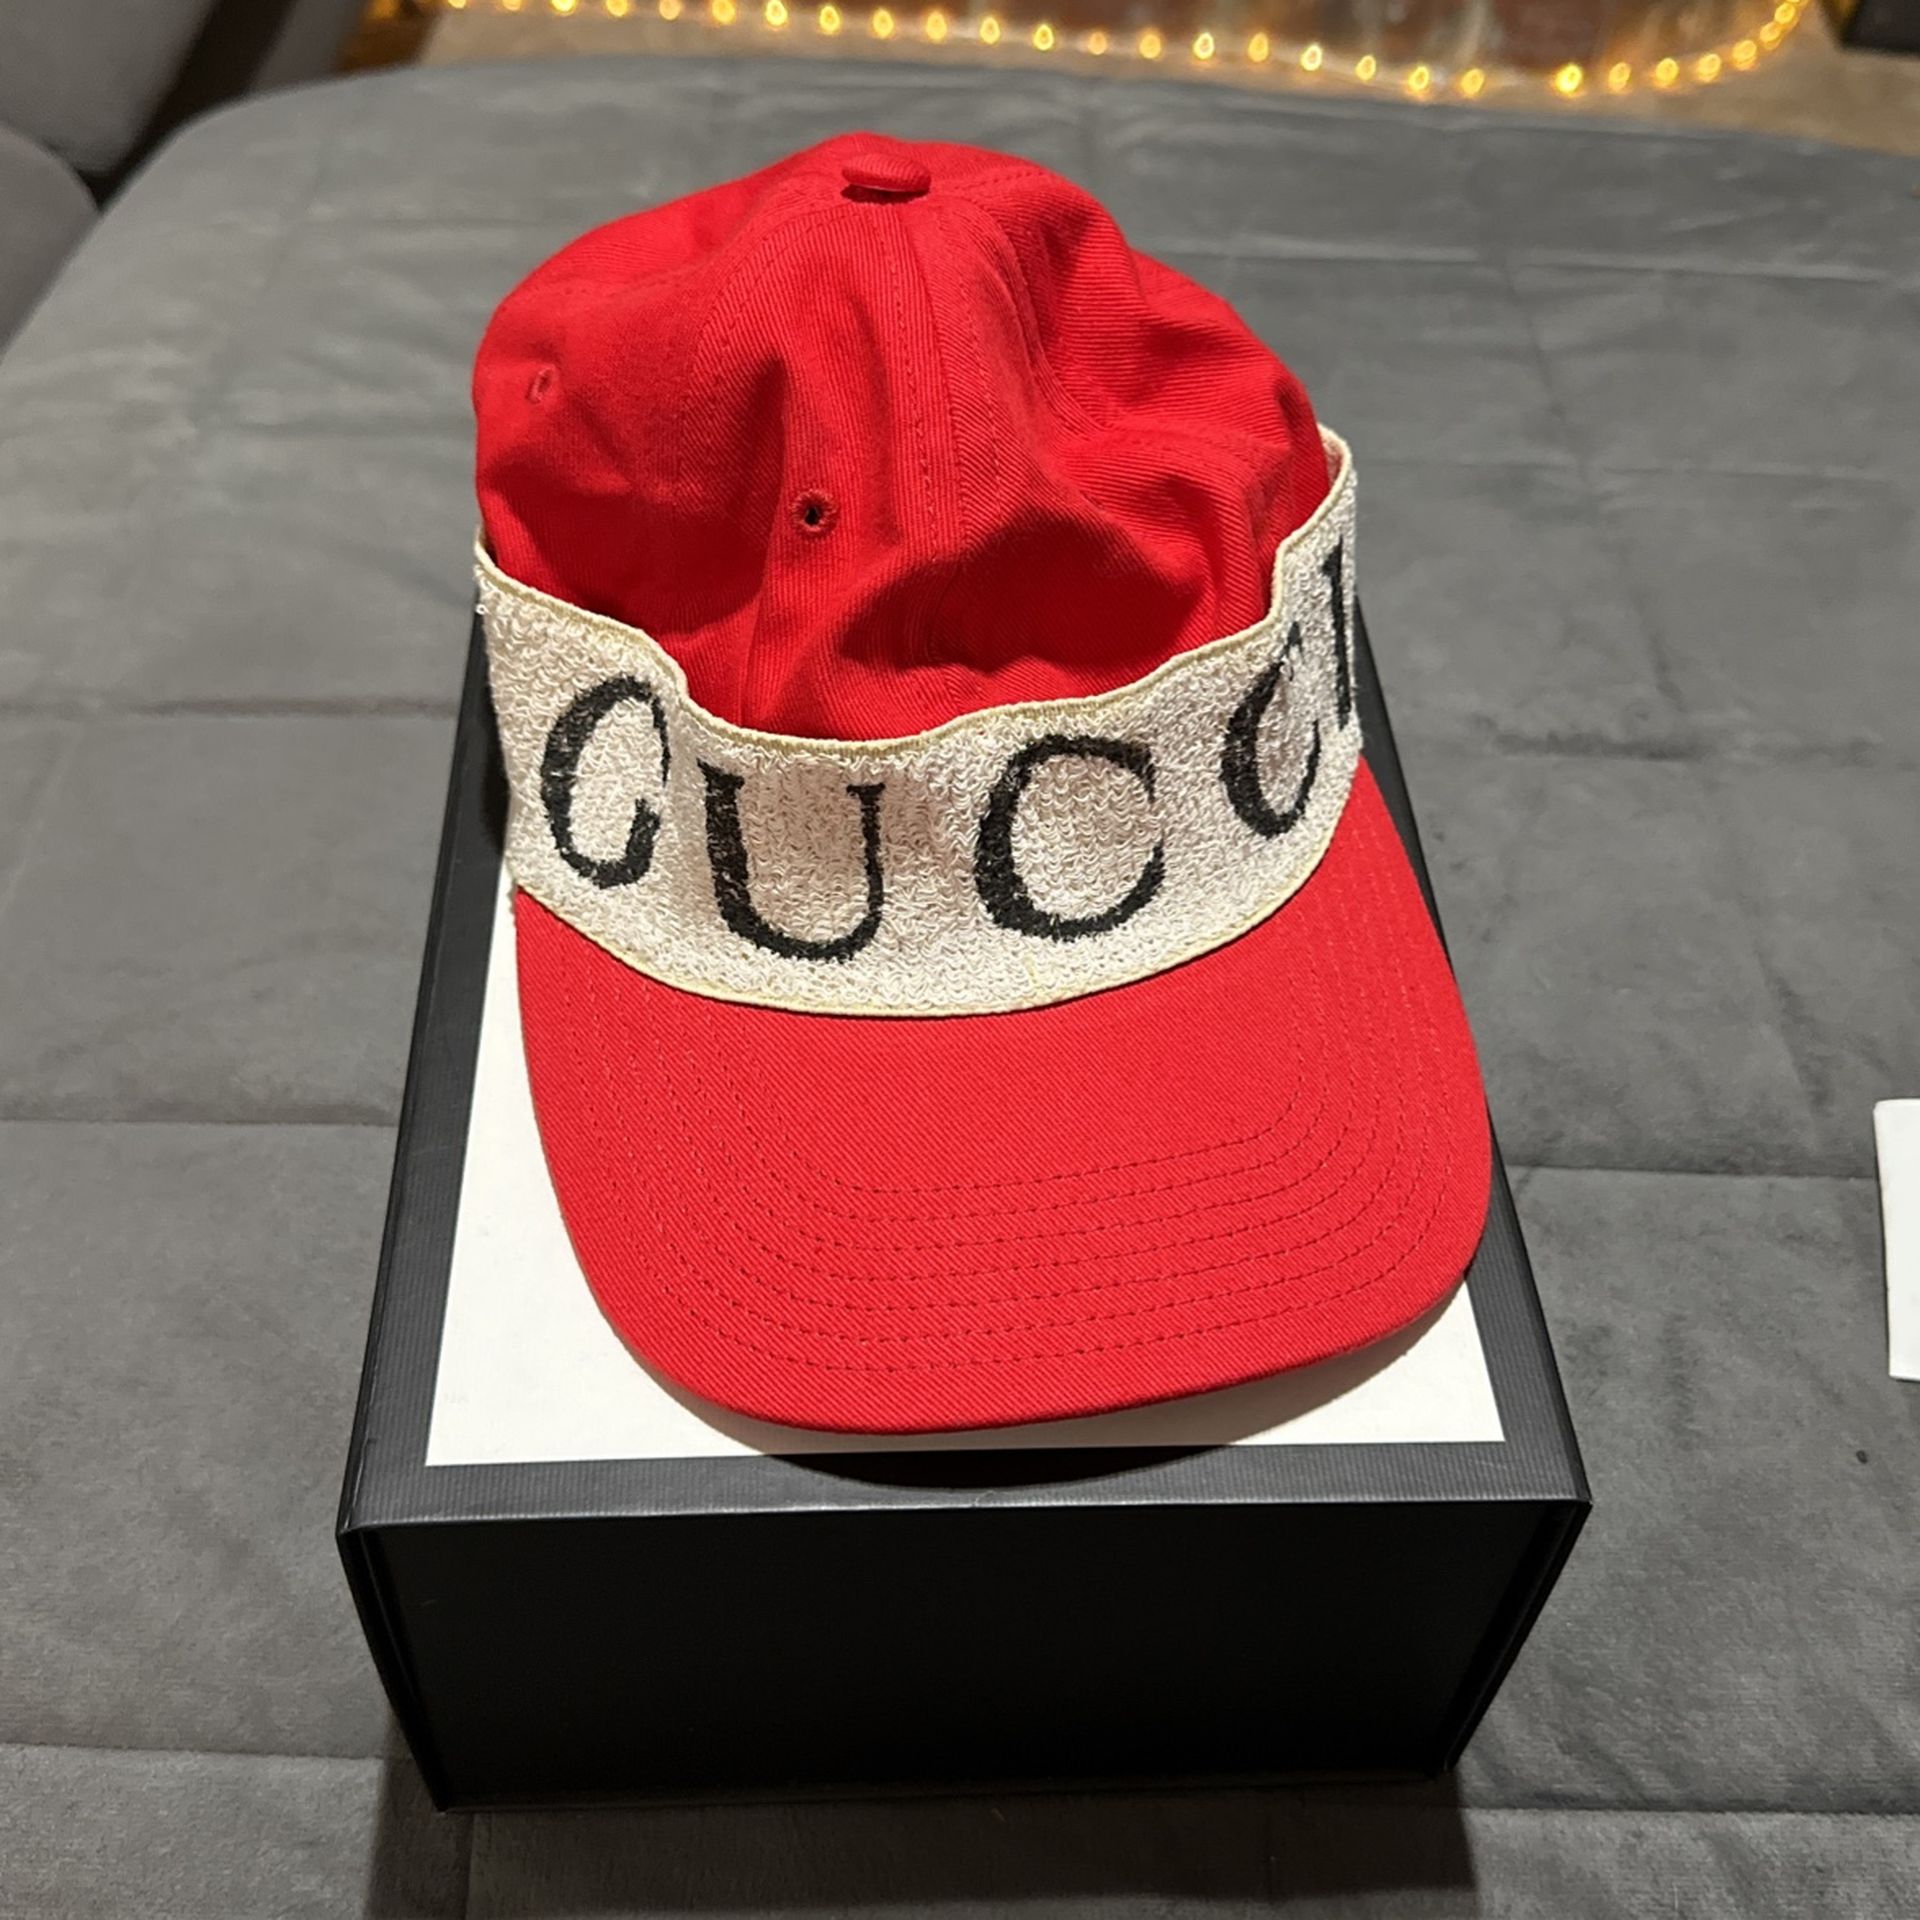 Authentic Gucci Hat Sold Out Everywhere